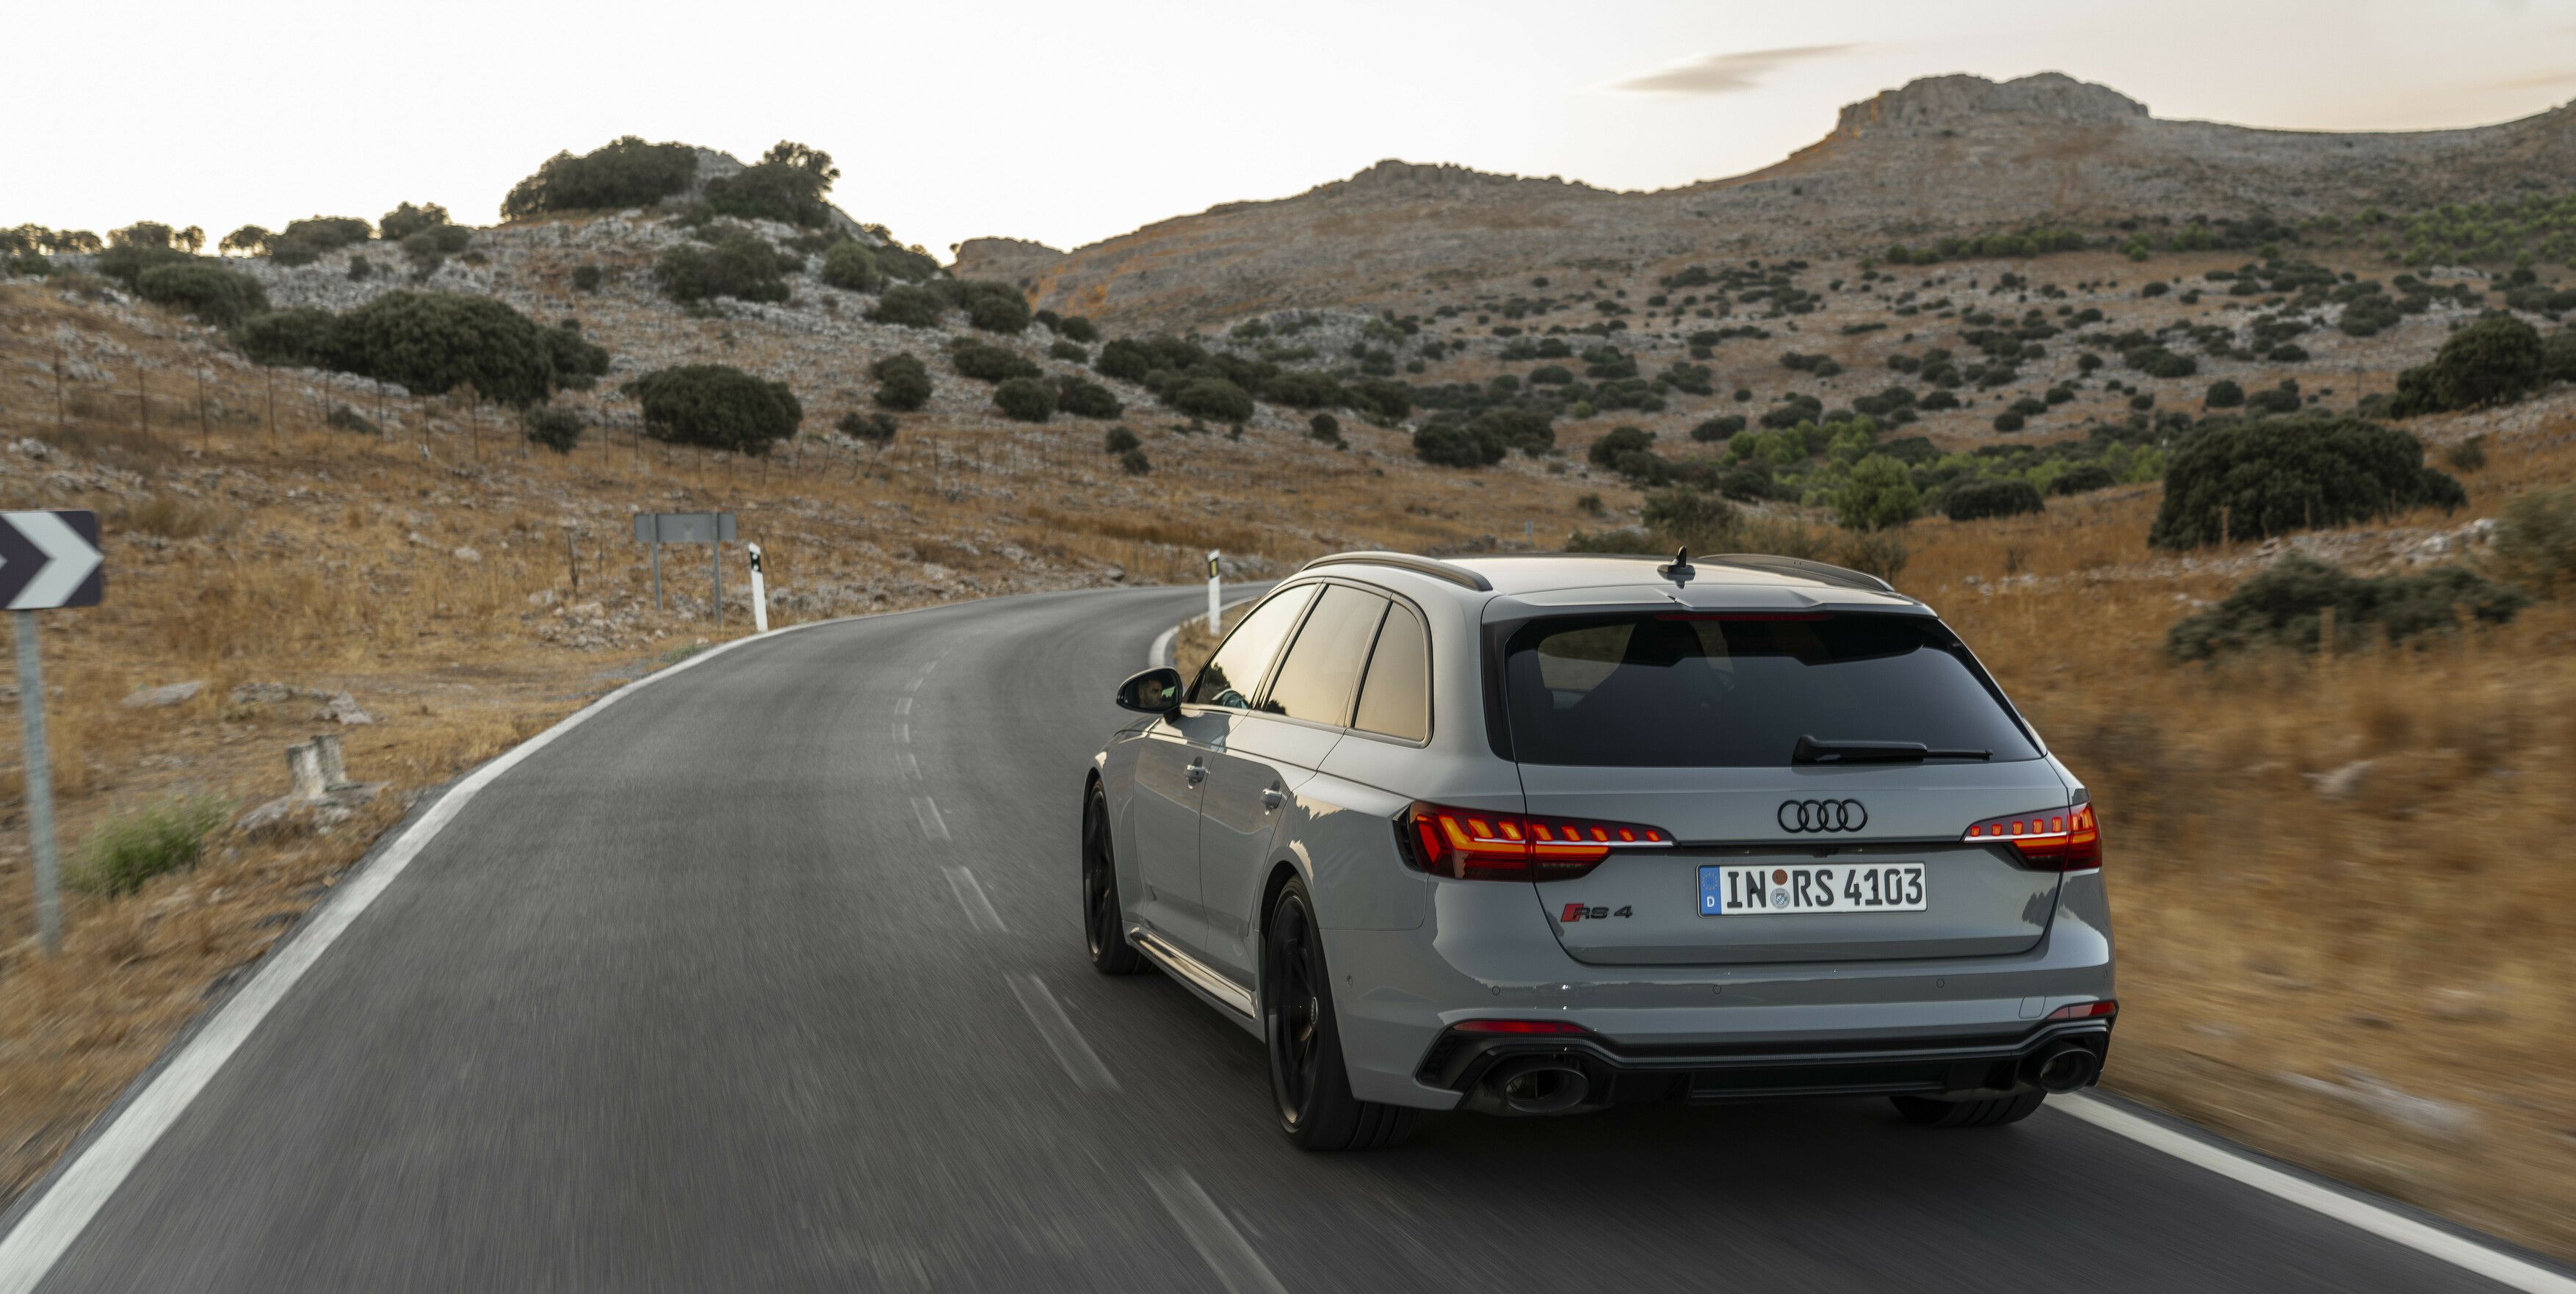 Audi Says the RS4 Wagon 'Is Not Coming' to America